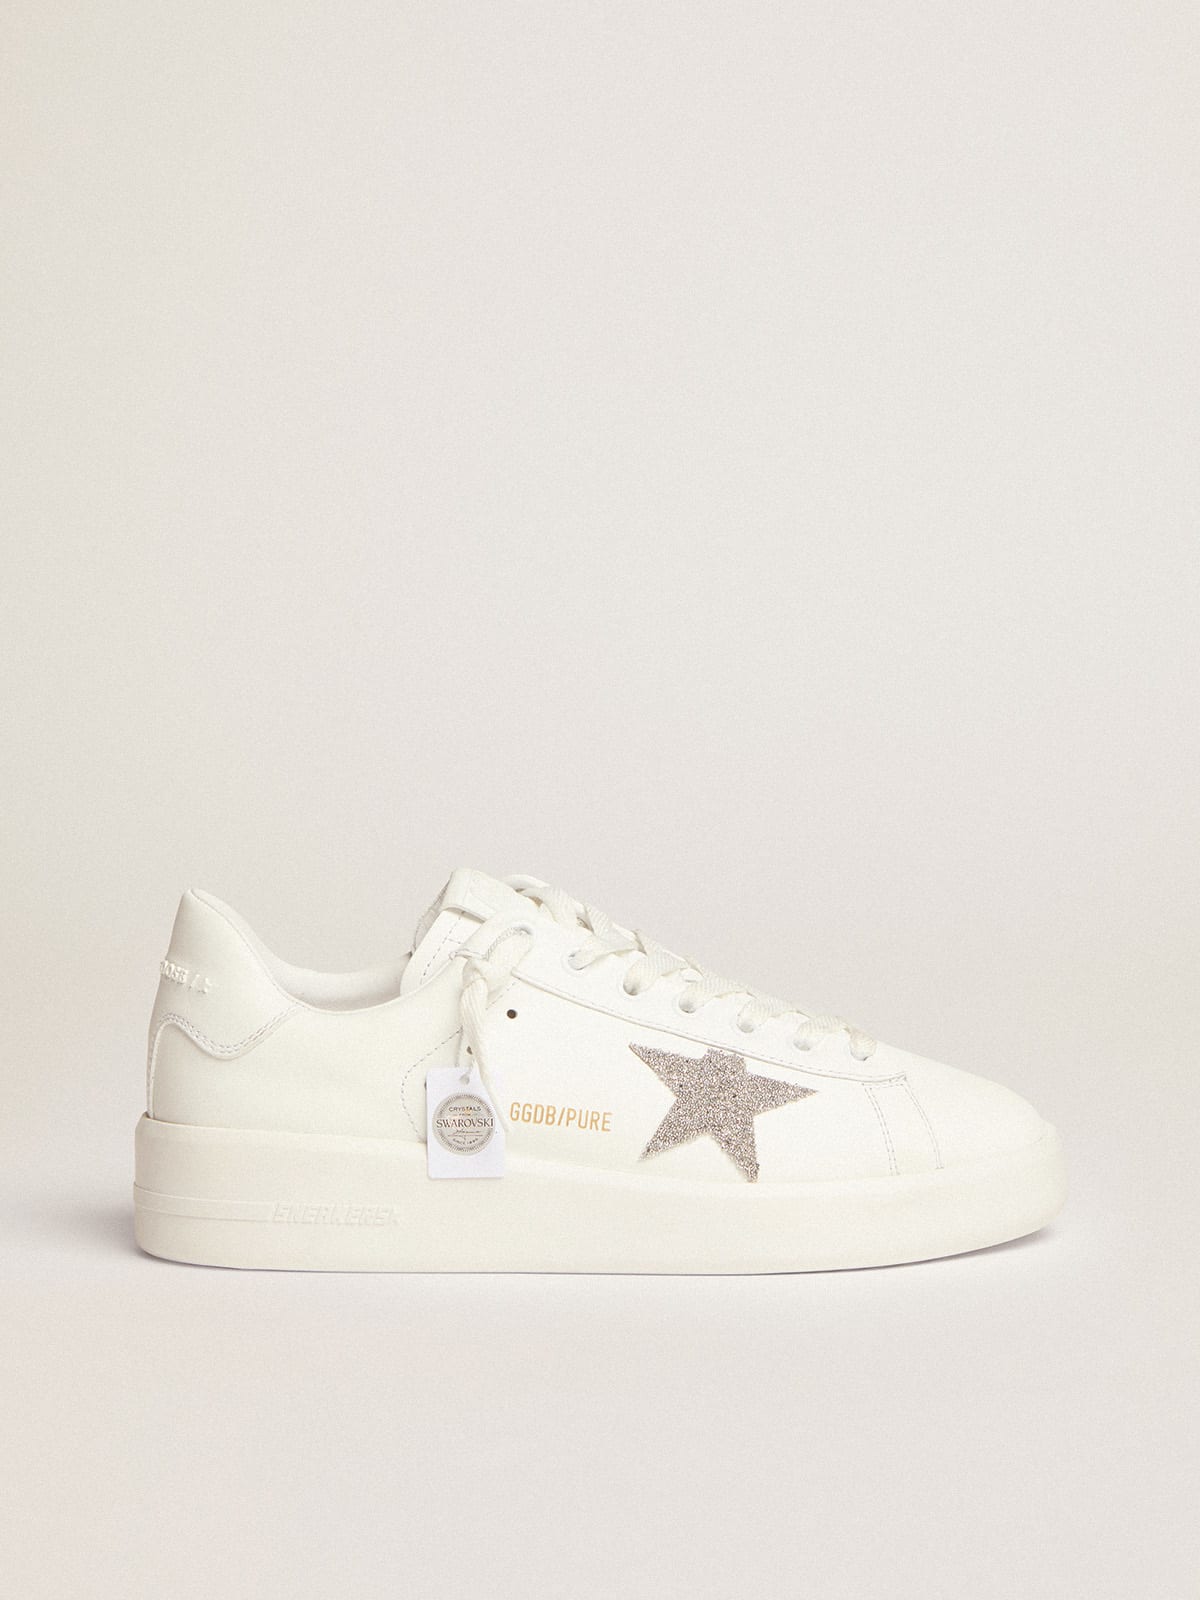 Purestar sneakers in white leather with silver-colored crystal star